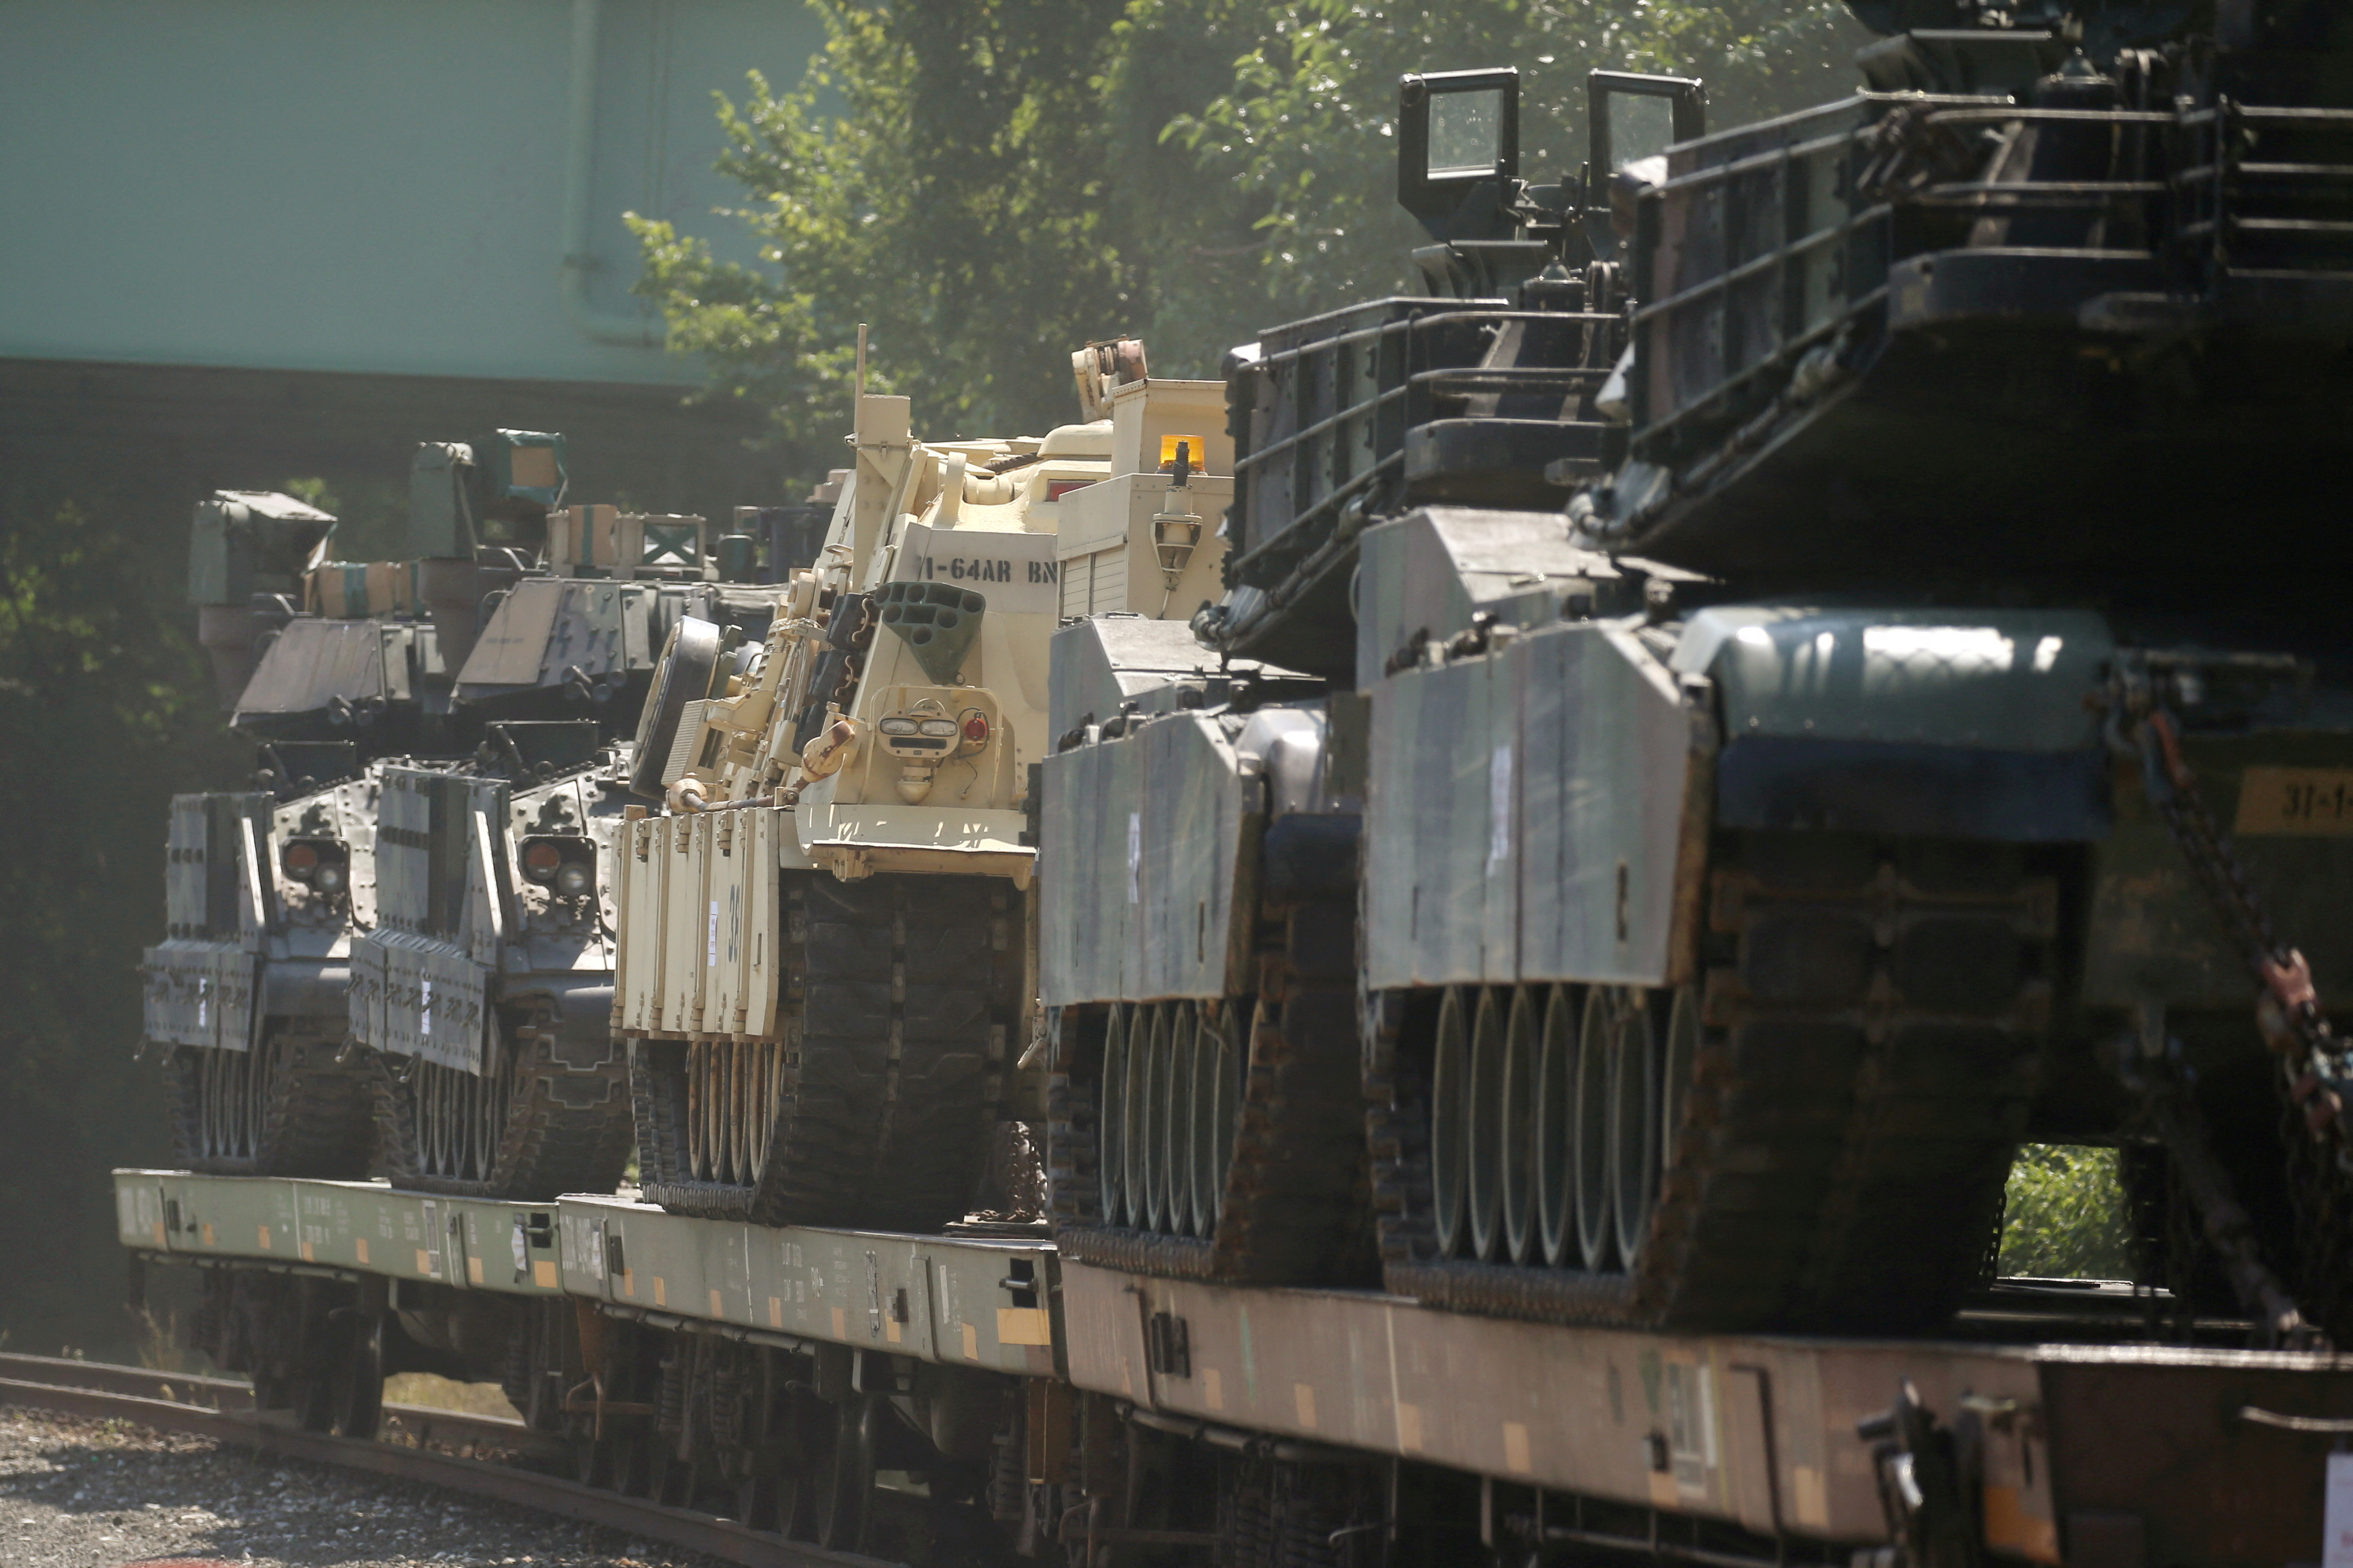 M1 Abrams tanks and armored vehicles sit in a rail yard in Southeast Washington